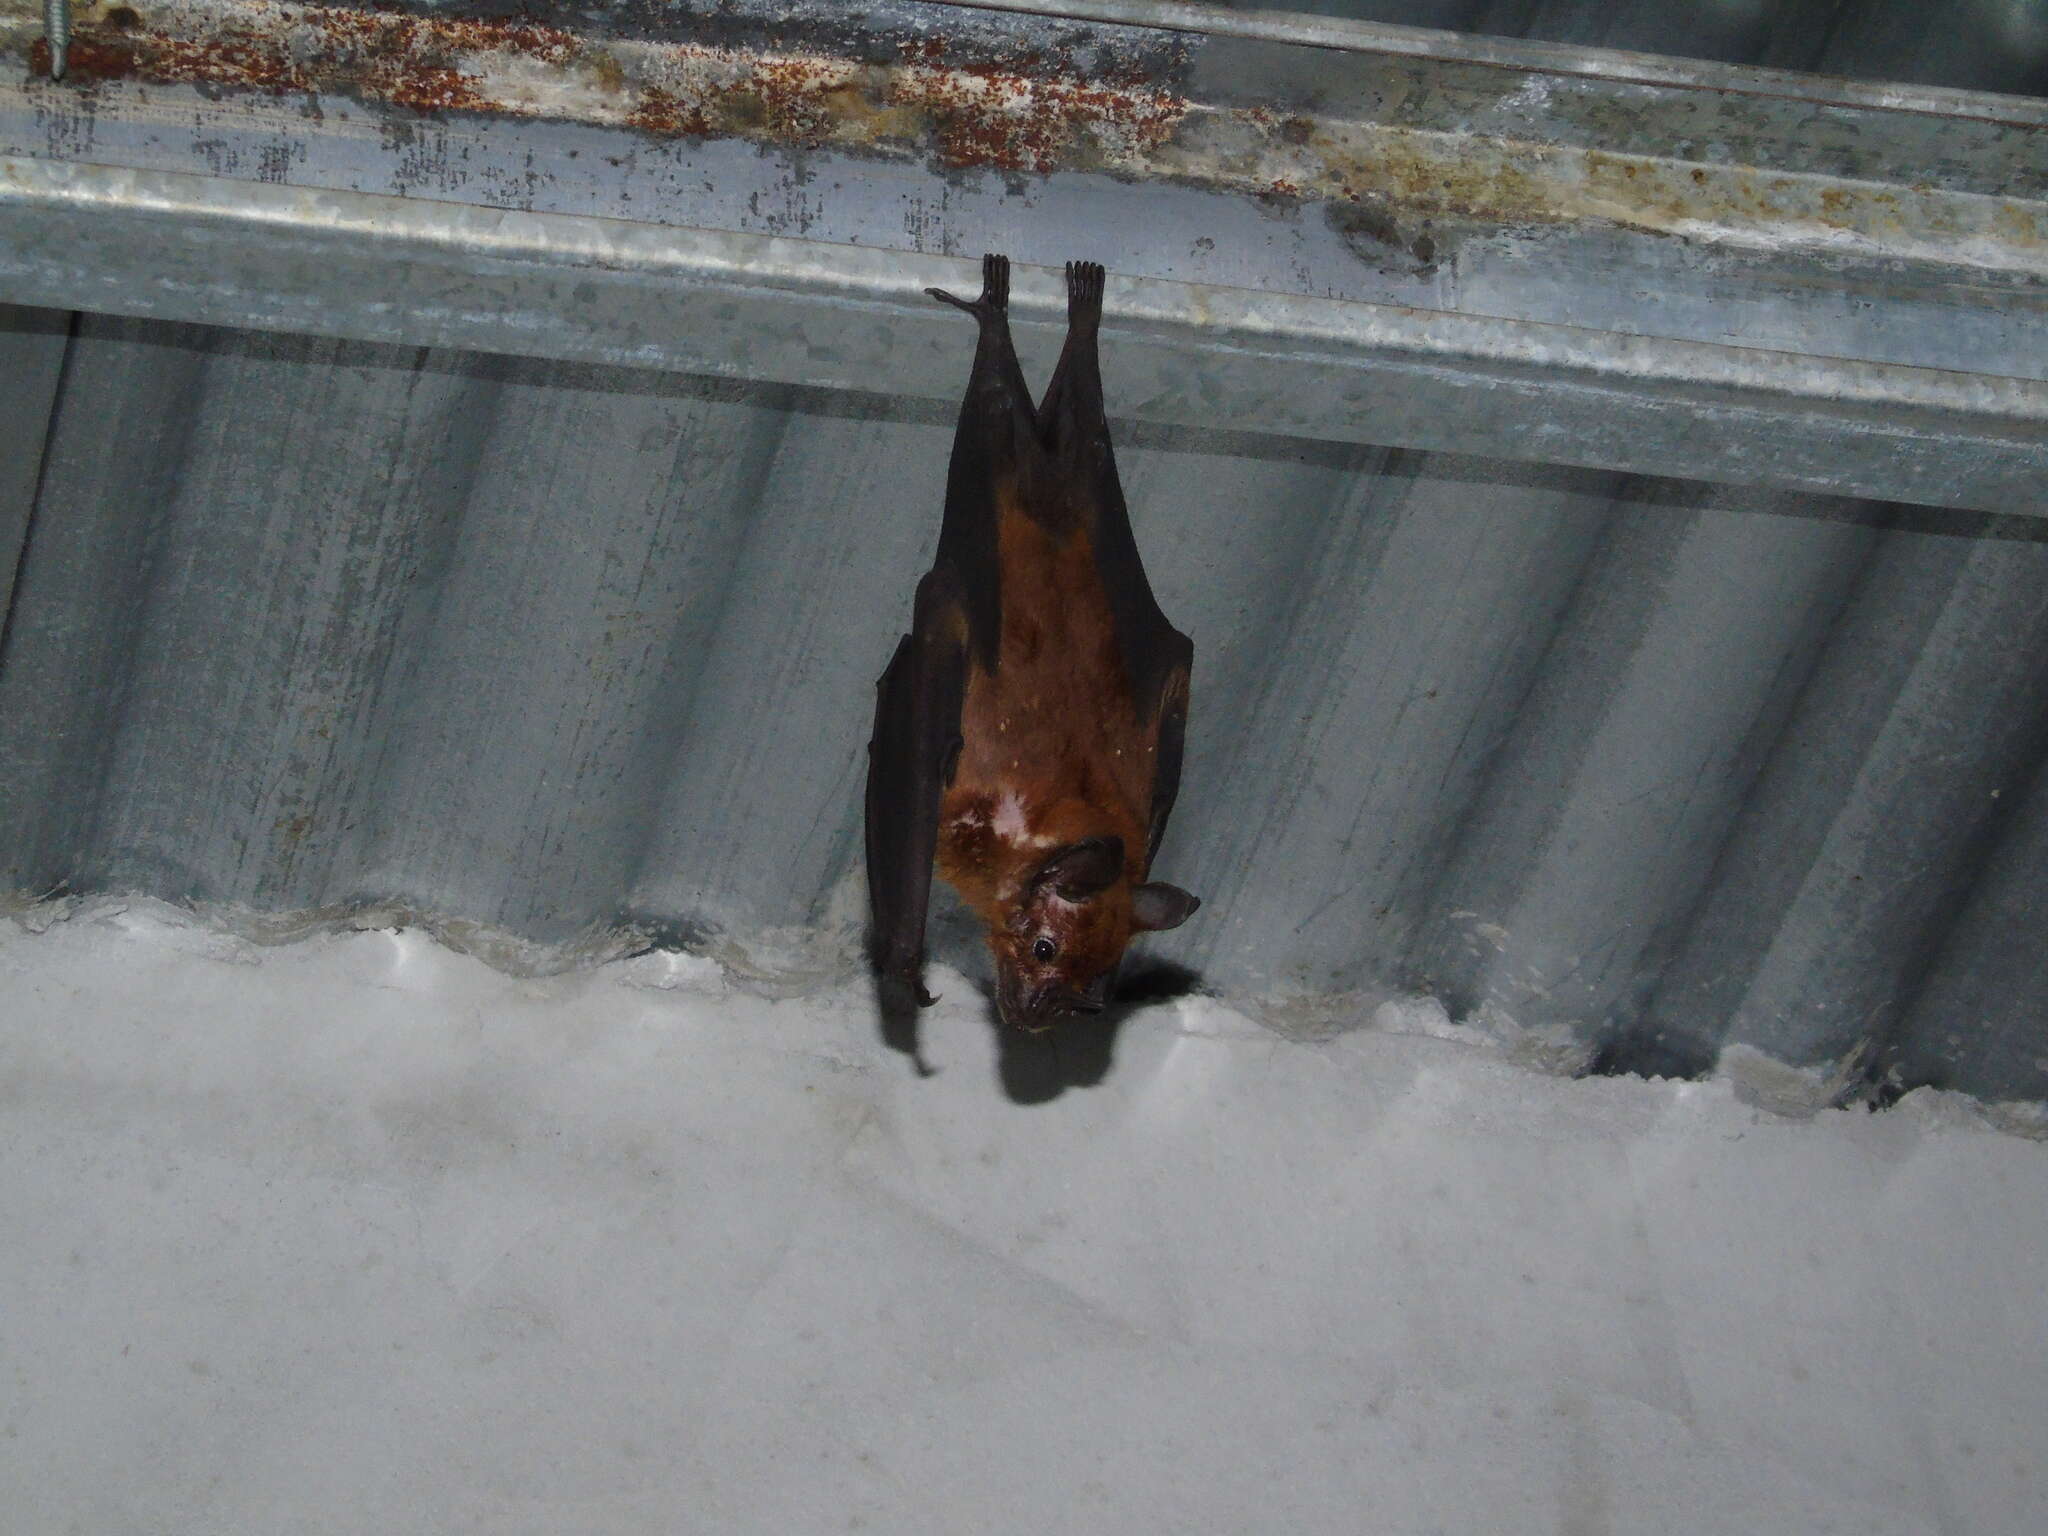 Image of Spear-nosed Bats.